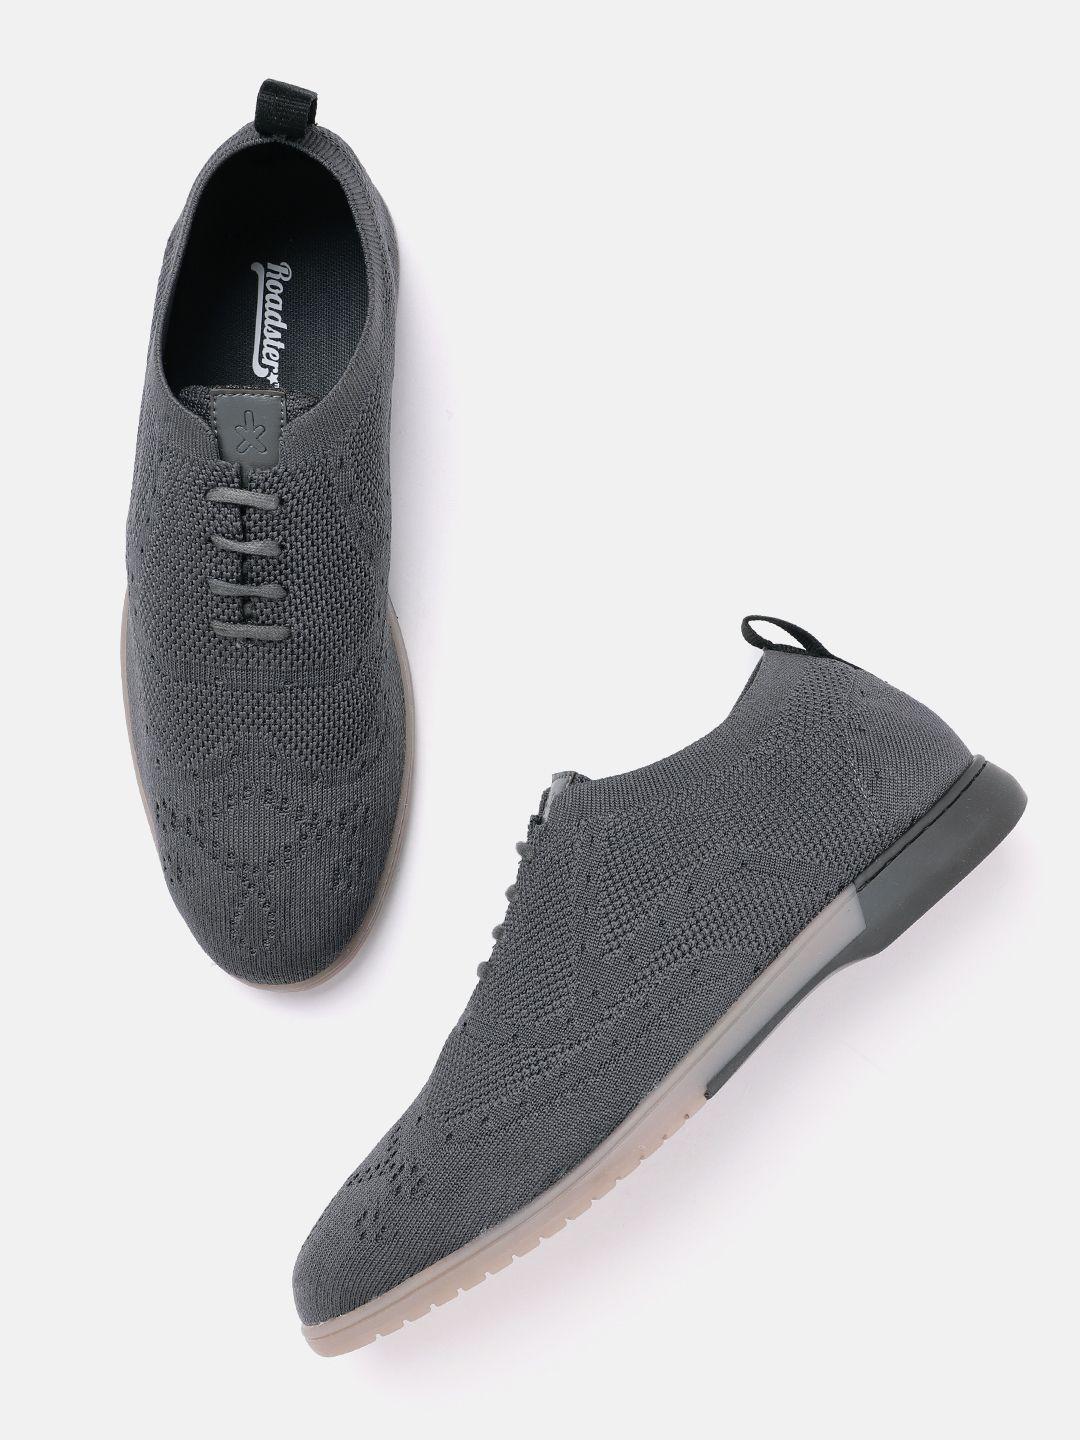 The Roadster Lifestyle Co. Men Woven Design Sneakers